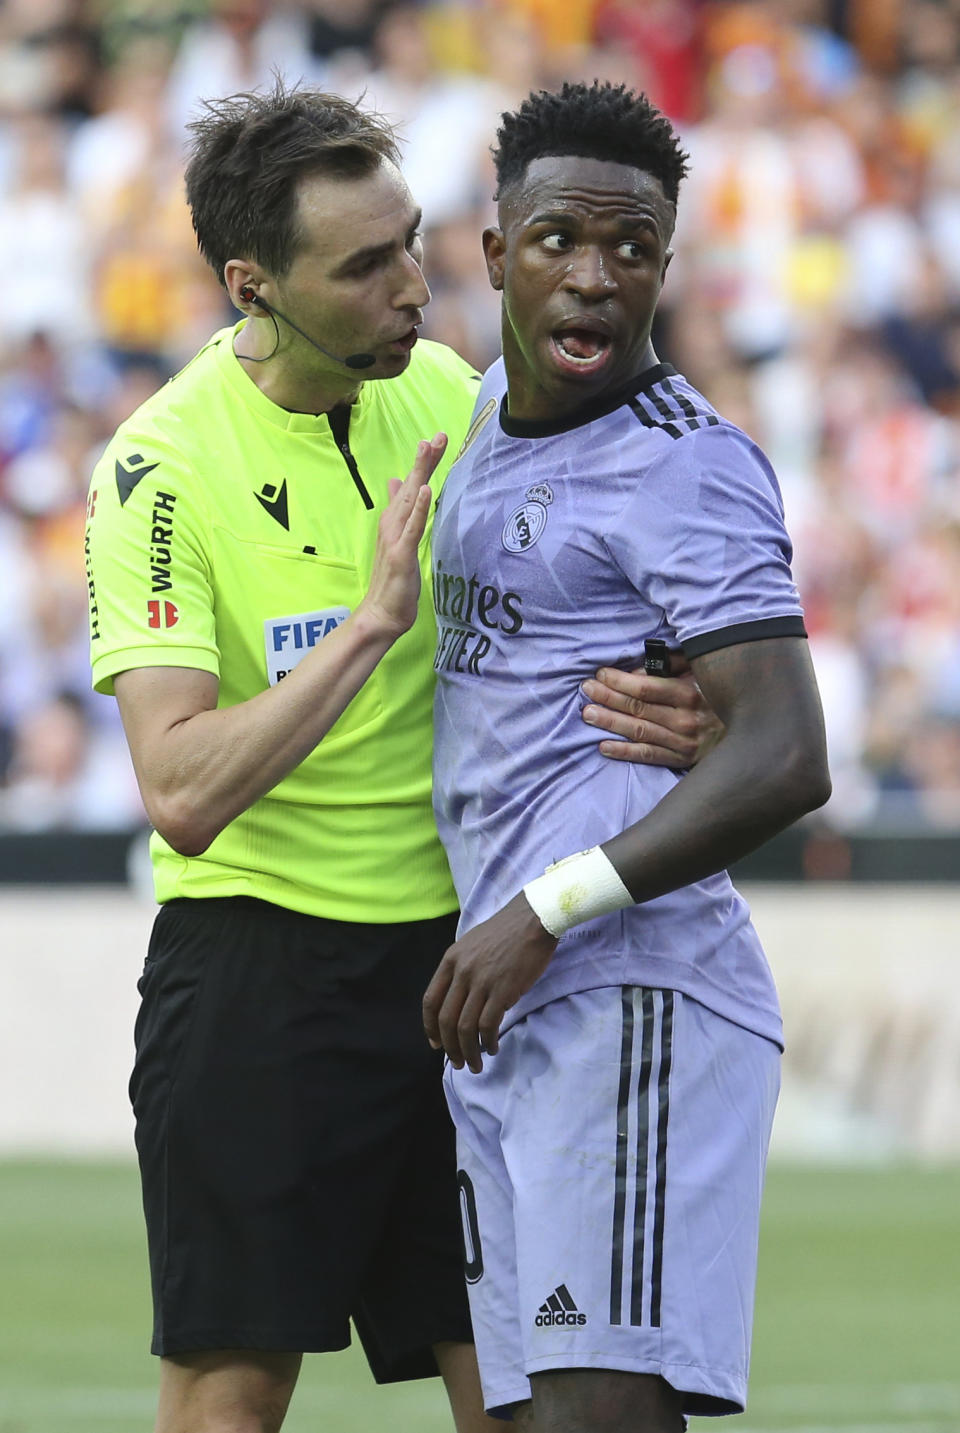 Referee Ricardo De Burgos Bengoetxea, left, speaks with Real Madrid's Vinicius Junior during a Spanish La Liga soccer match between Valencia and Real Madrid, at the Mestalla stadium in Valencia, Spain, Sunday, May 21, 2023. The game was temporarily stopped when Vinicius said a fan had insulted him from the stands. He was later sent off after clashing with Valencia players. (AP Photo/Alberto Saiz)